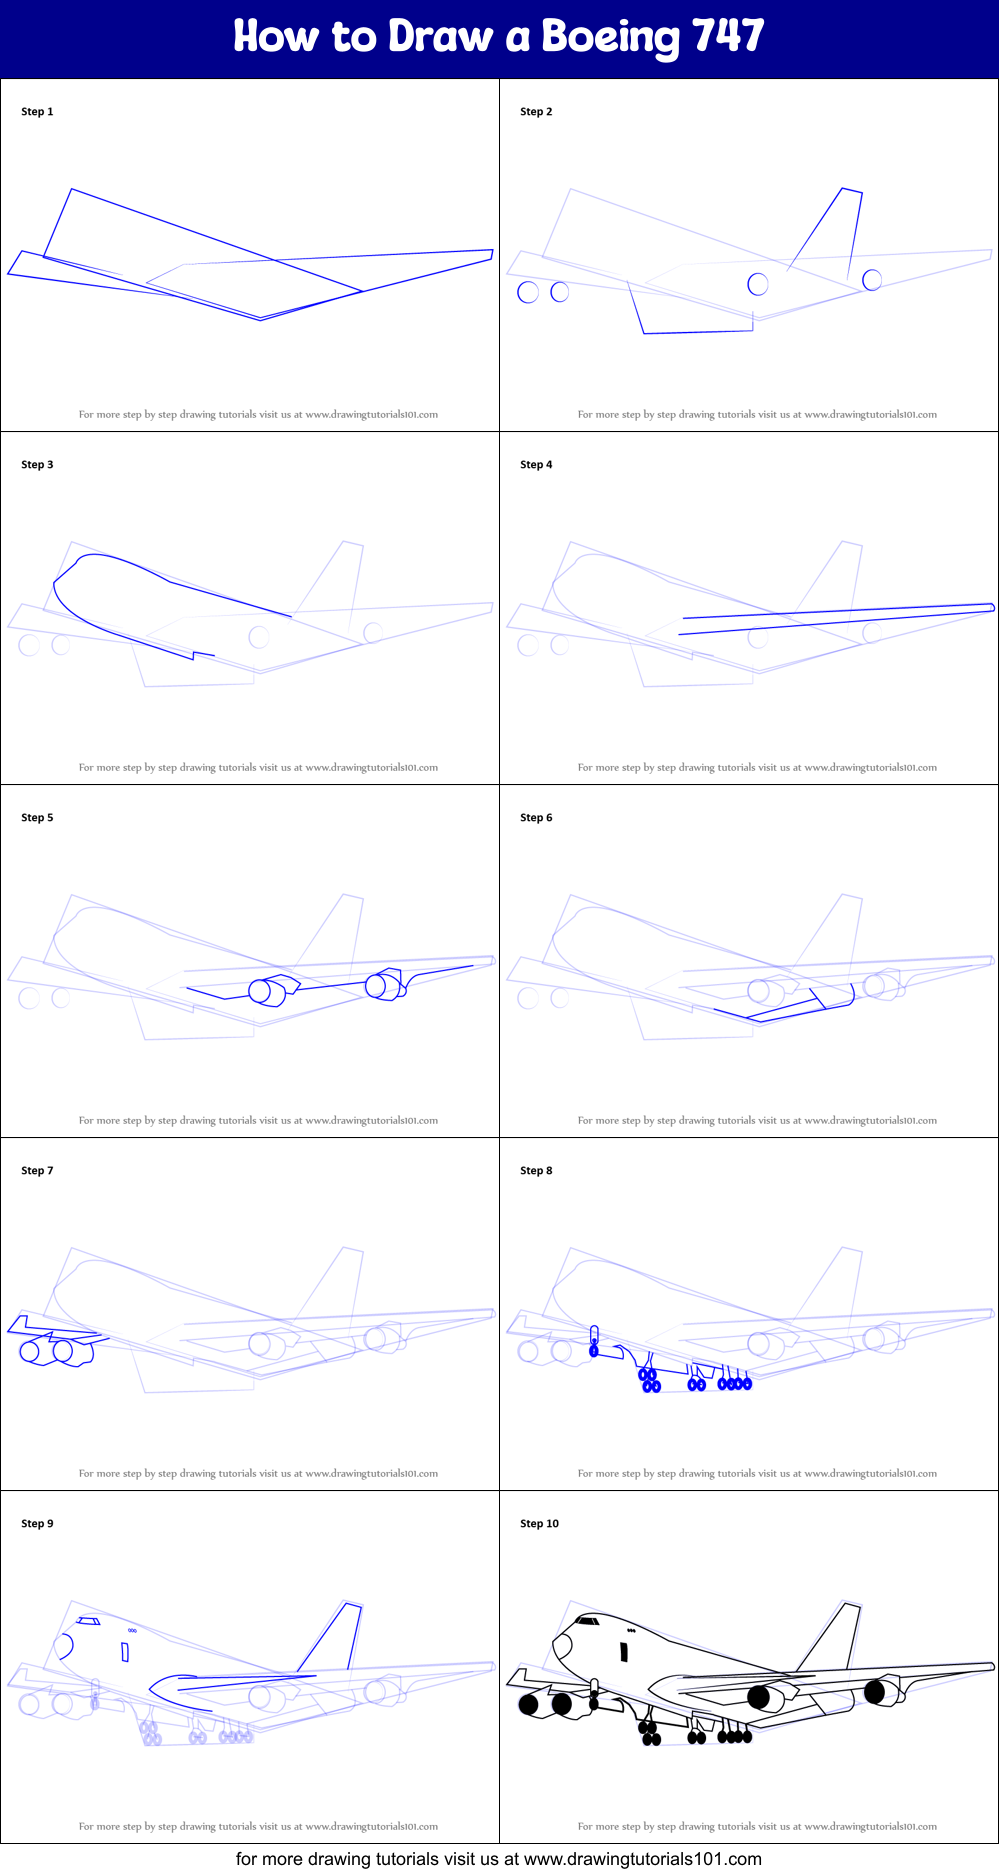 How to Draw a Boeing 747 printable step by step drawing sheet